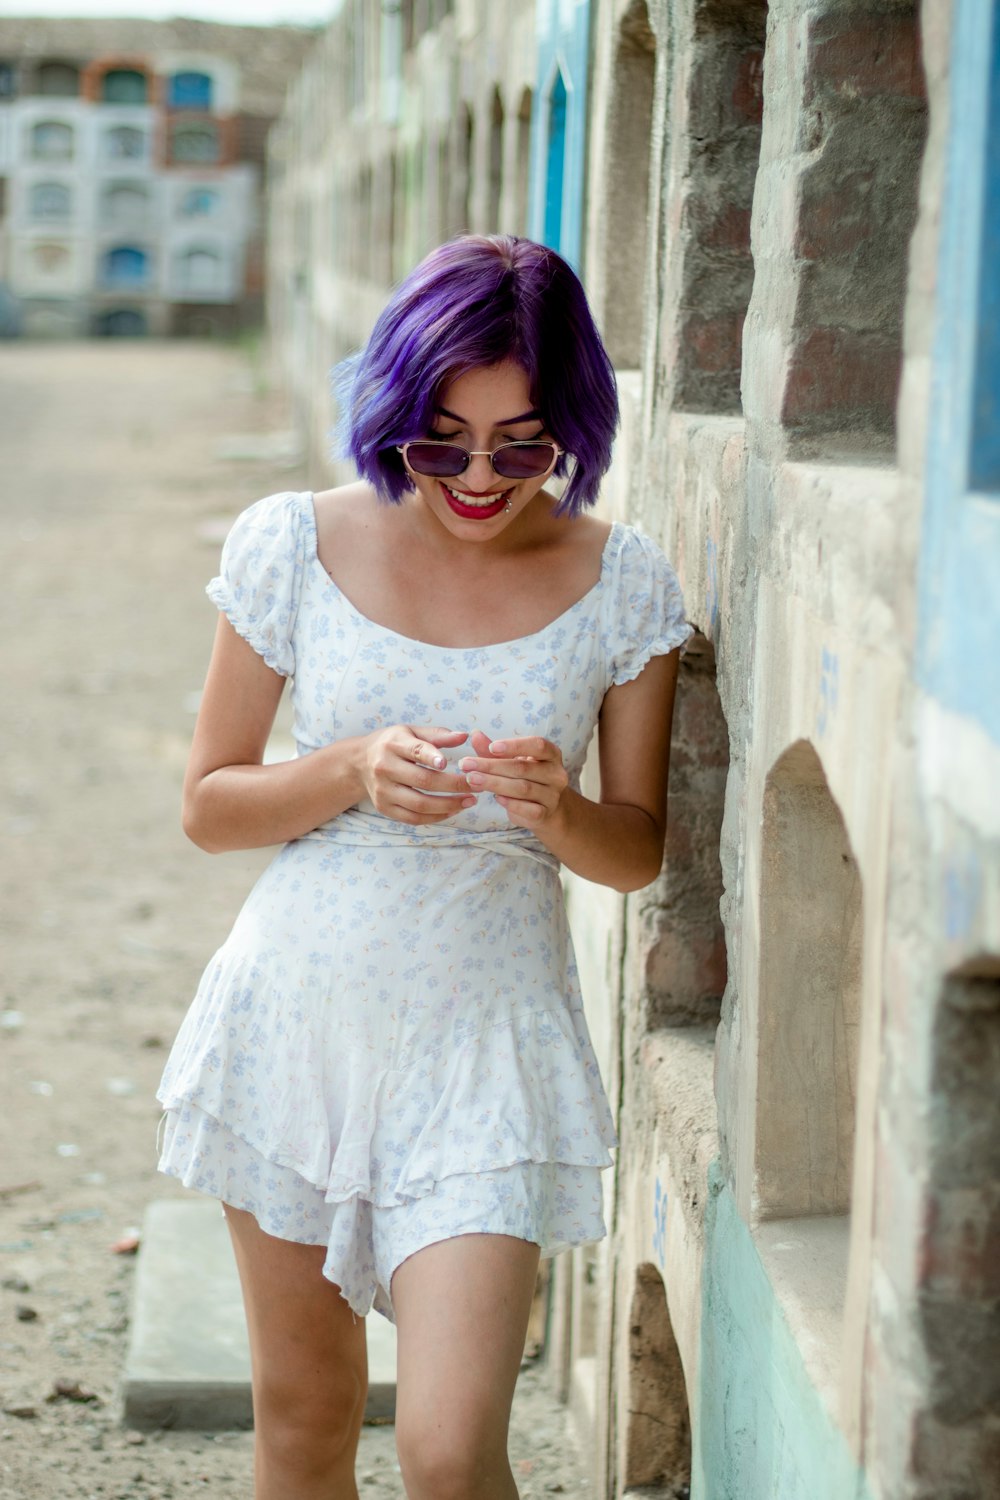 a woman with purple hair is looking at her cell phone